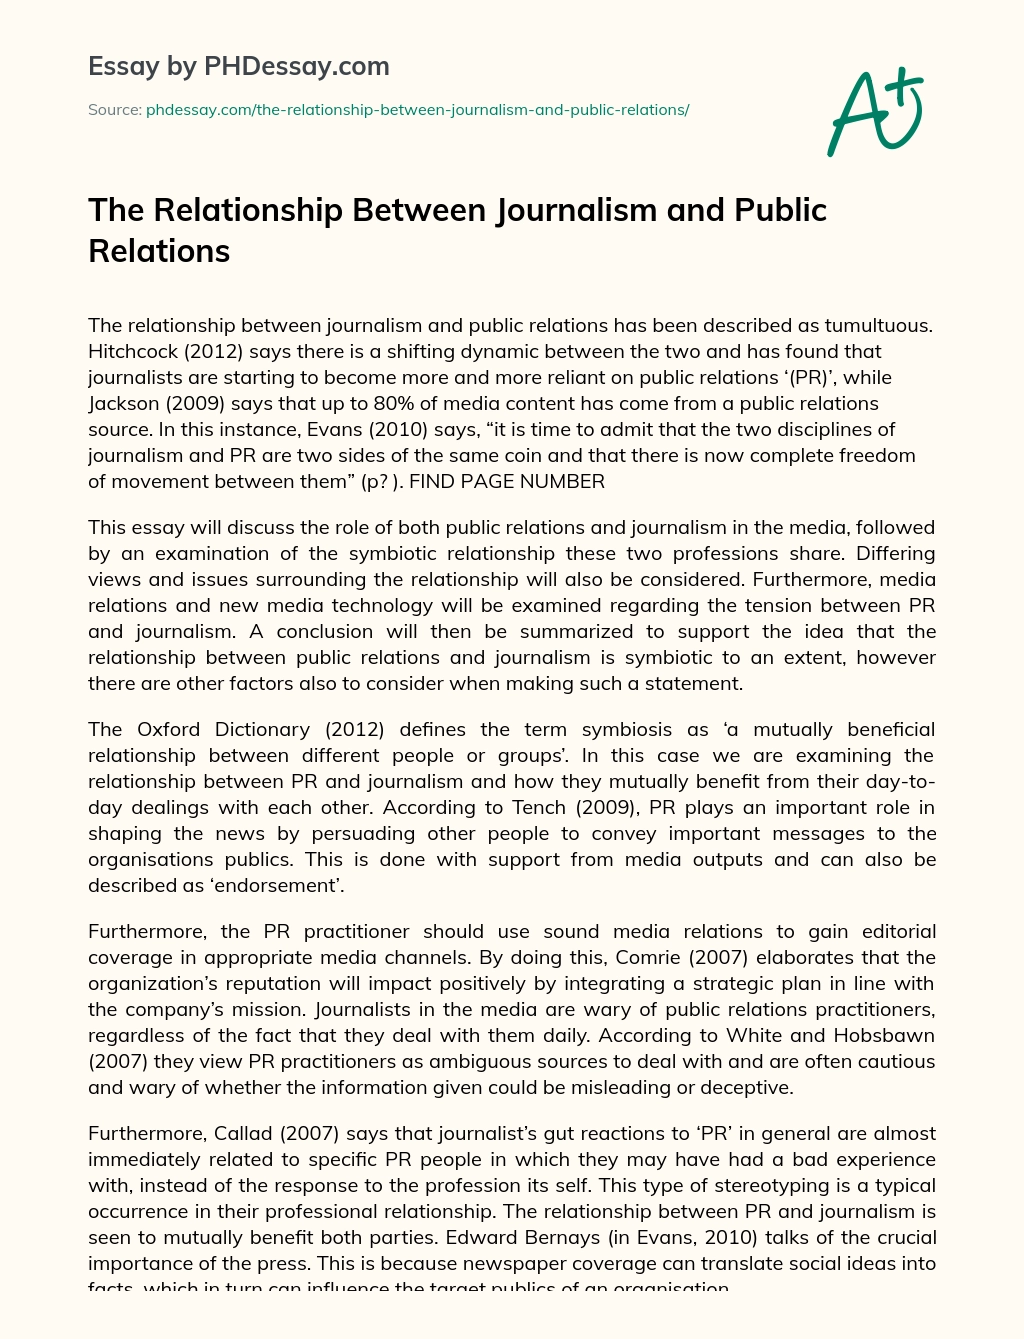 The Relationship Between Journalism and Public Relations essay